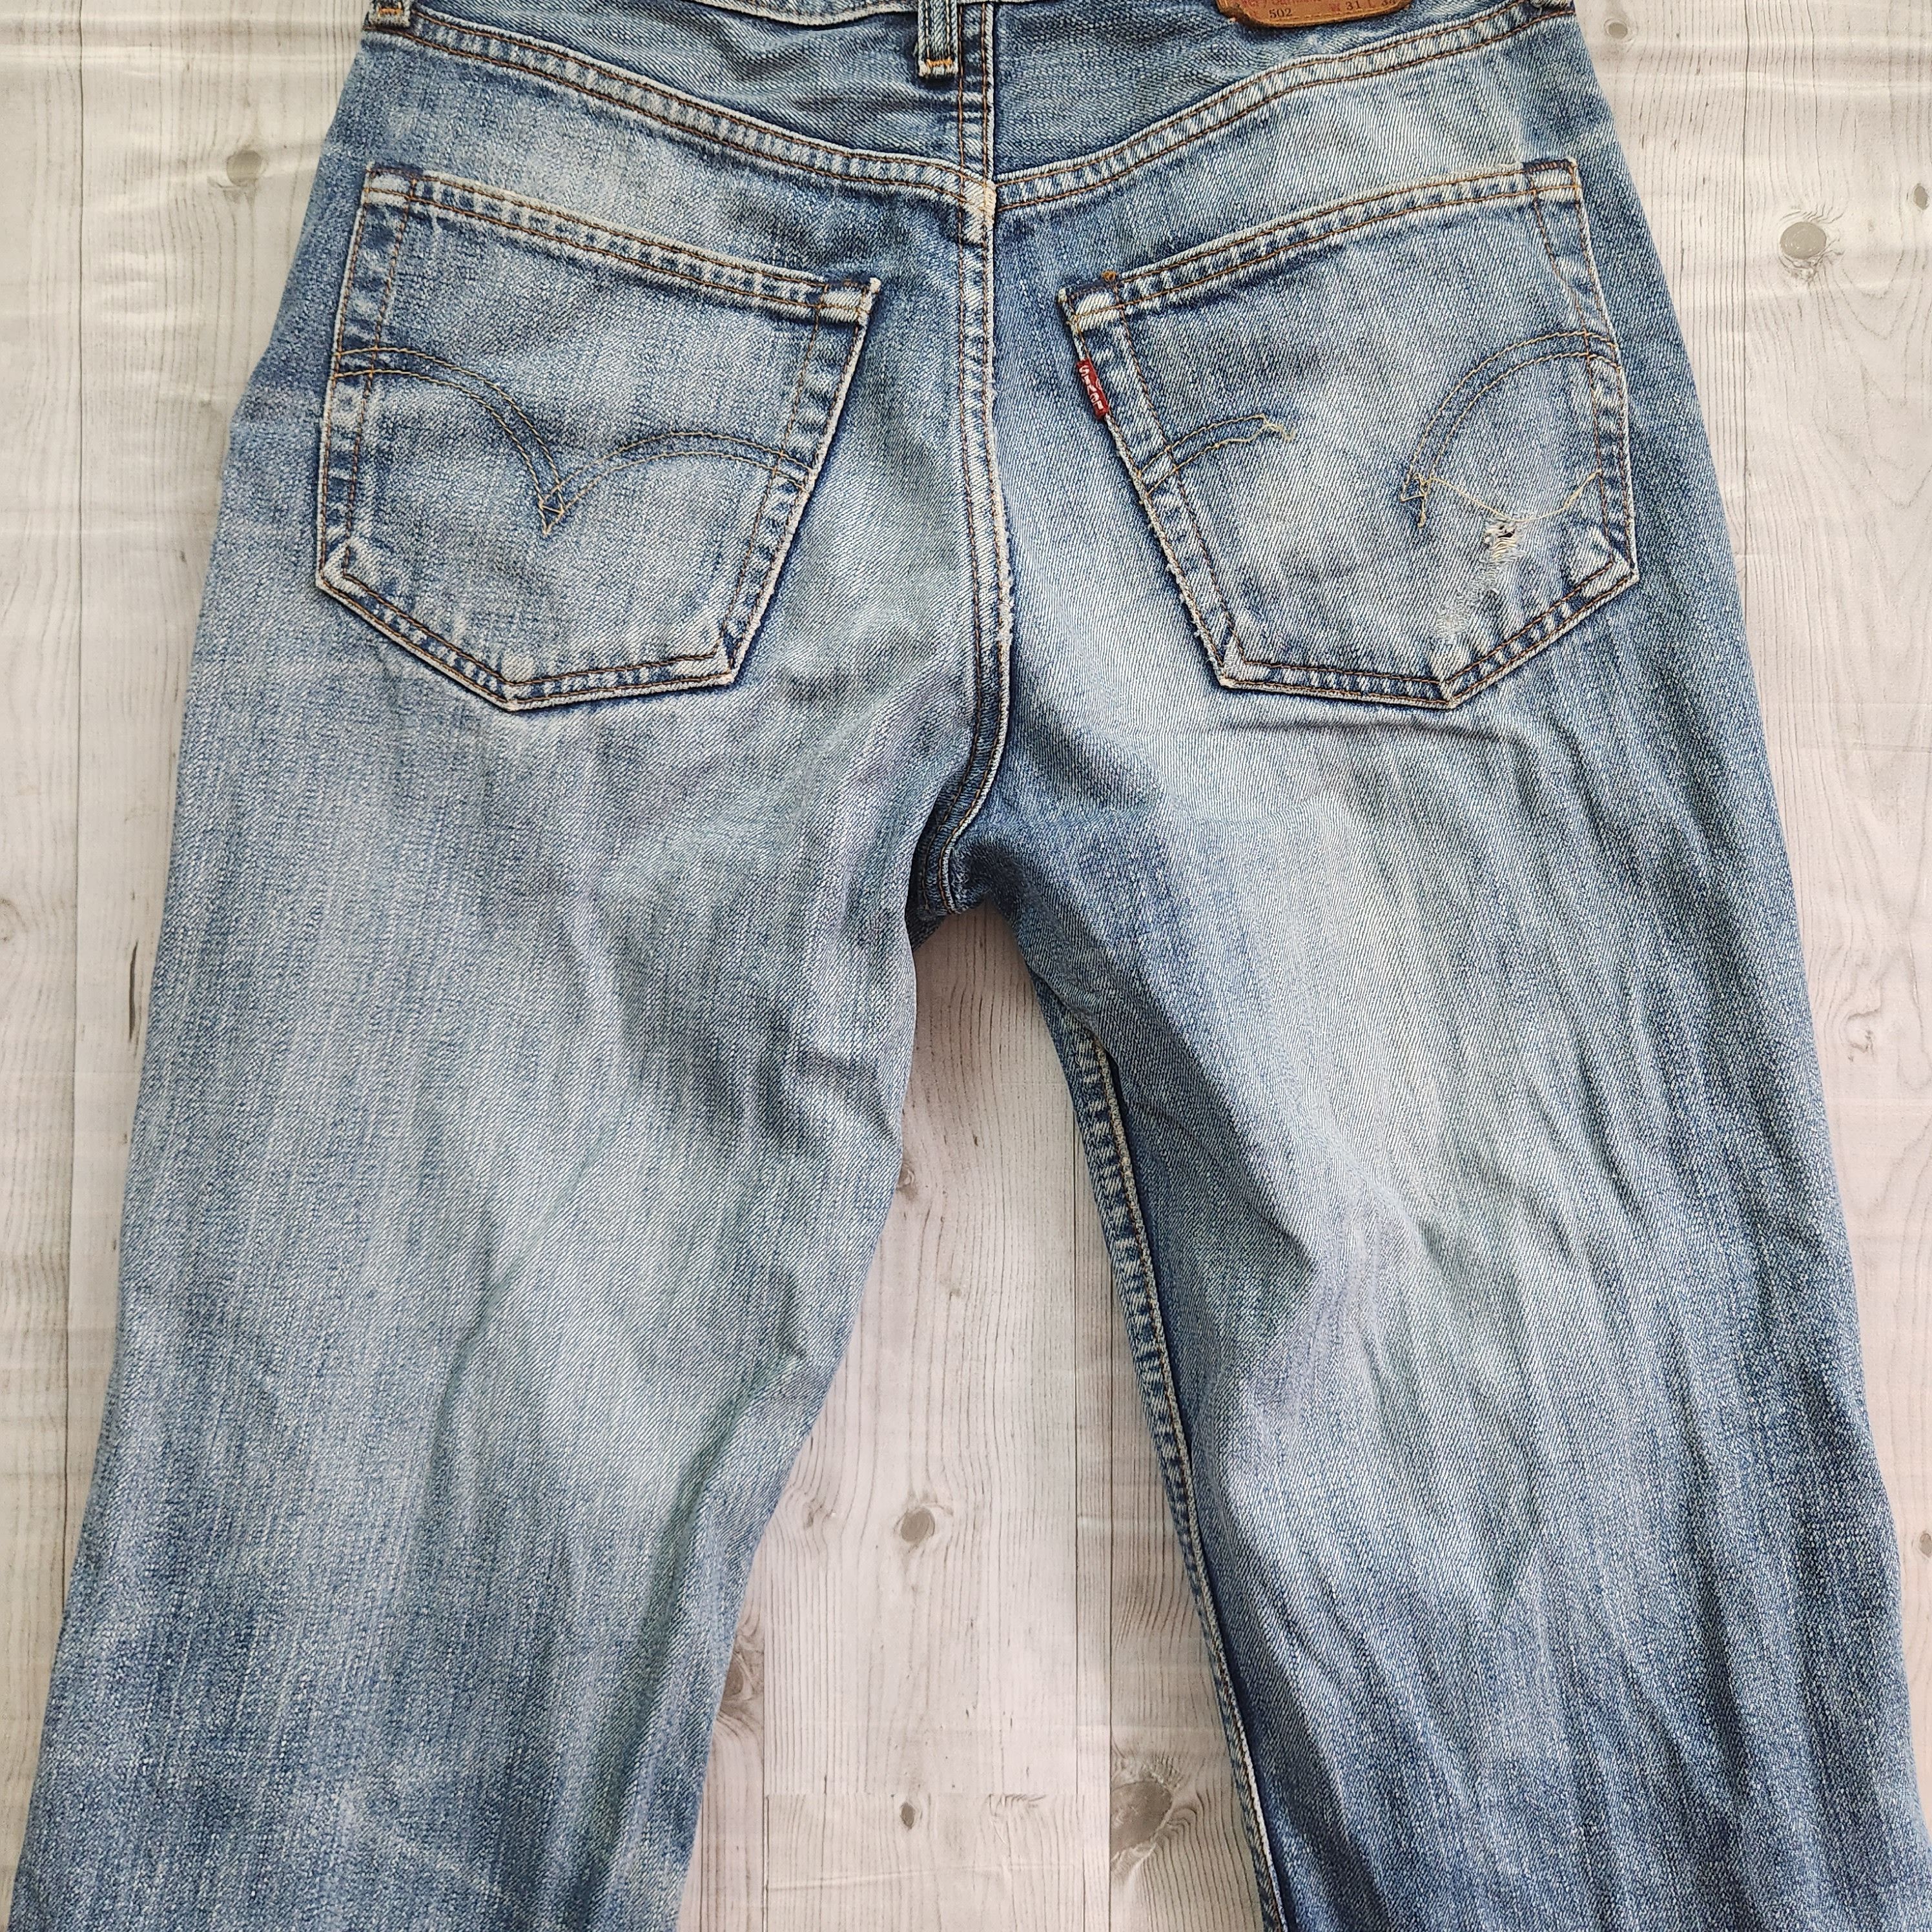 Levis 502 Vintage Distressed Ripped Denim Jeans Year 2002 - 16